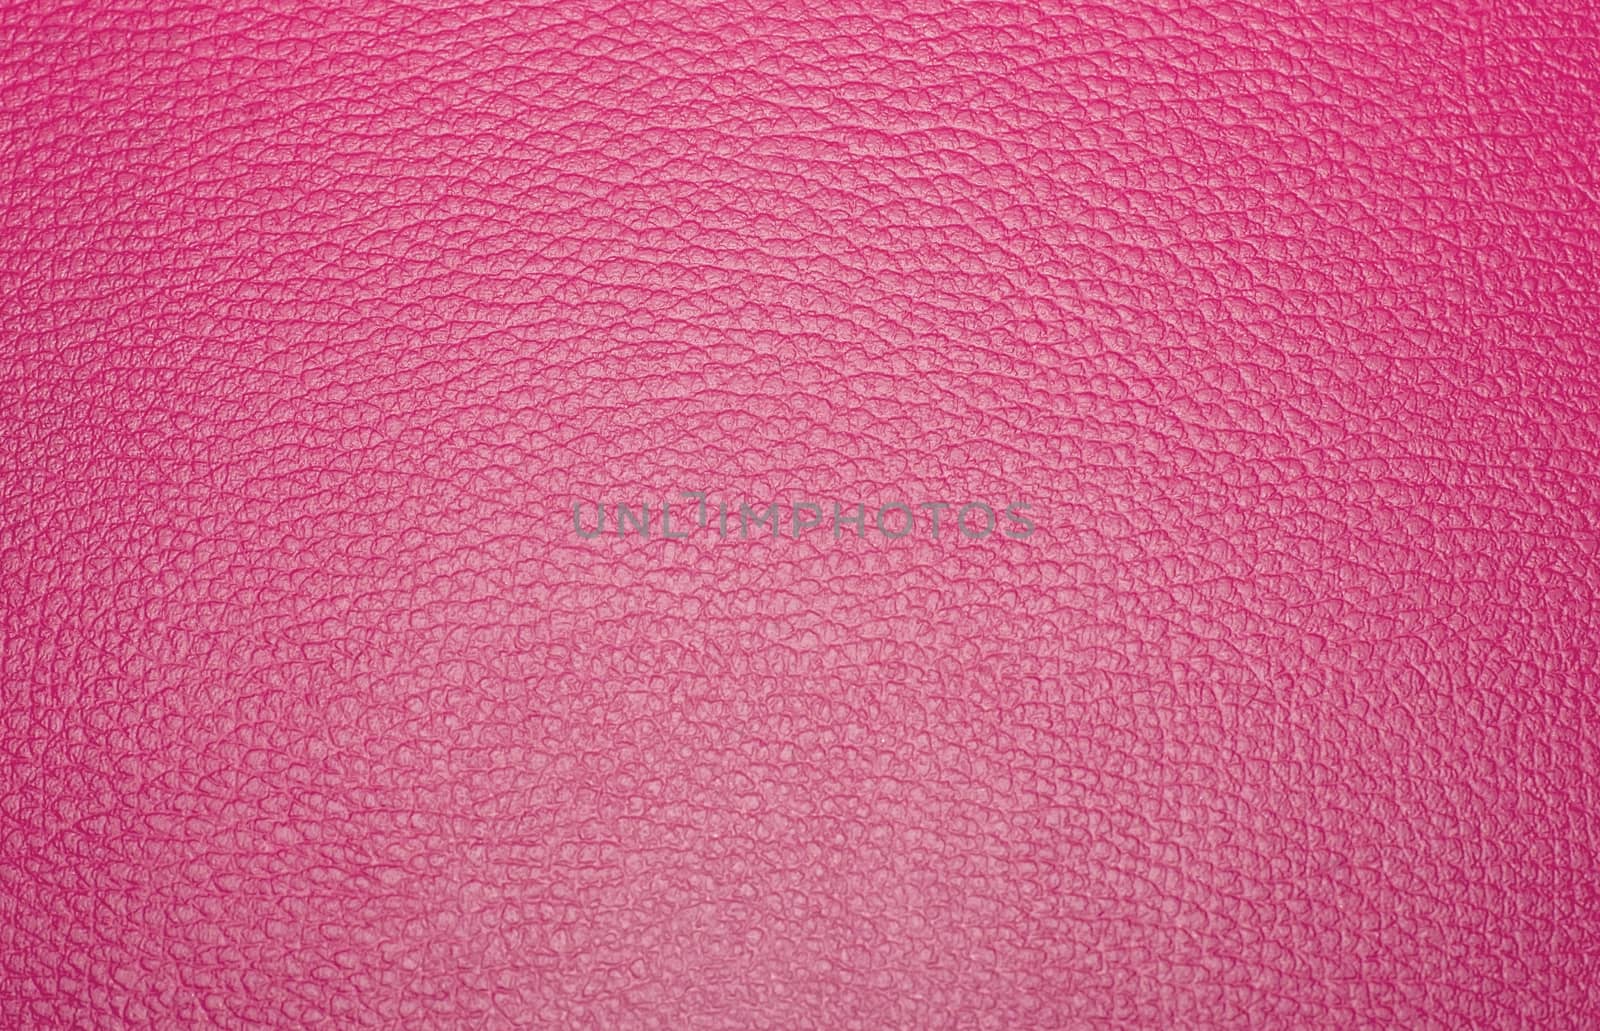 Texture colored leatherette pink, for design and upholstery for decoration and fashion, for the background and tukstur